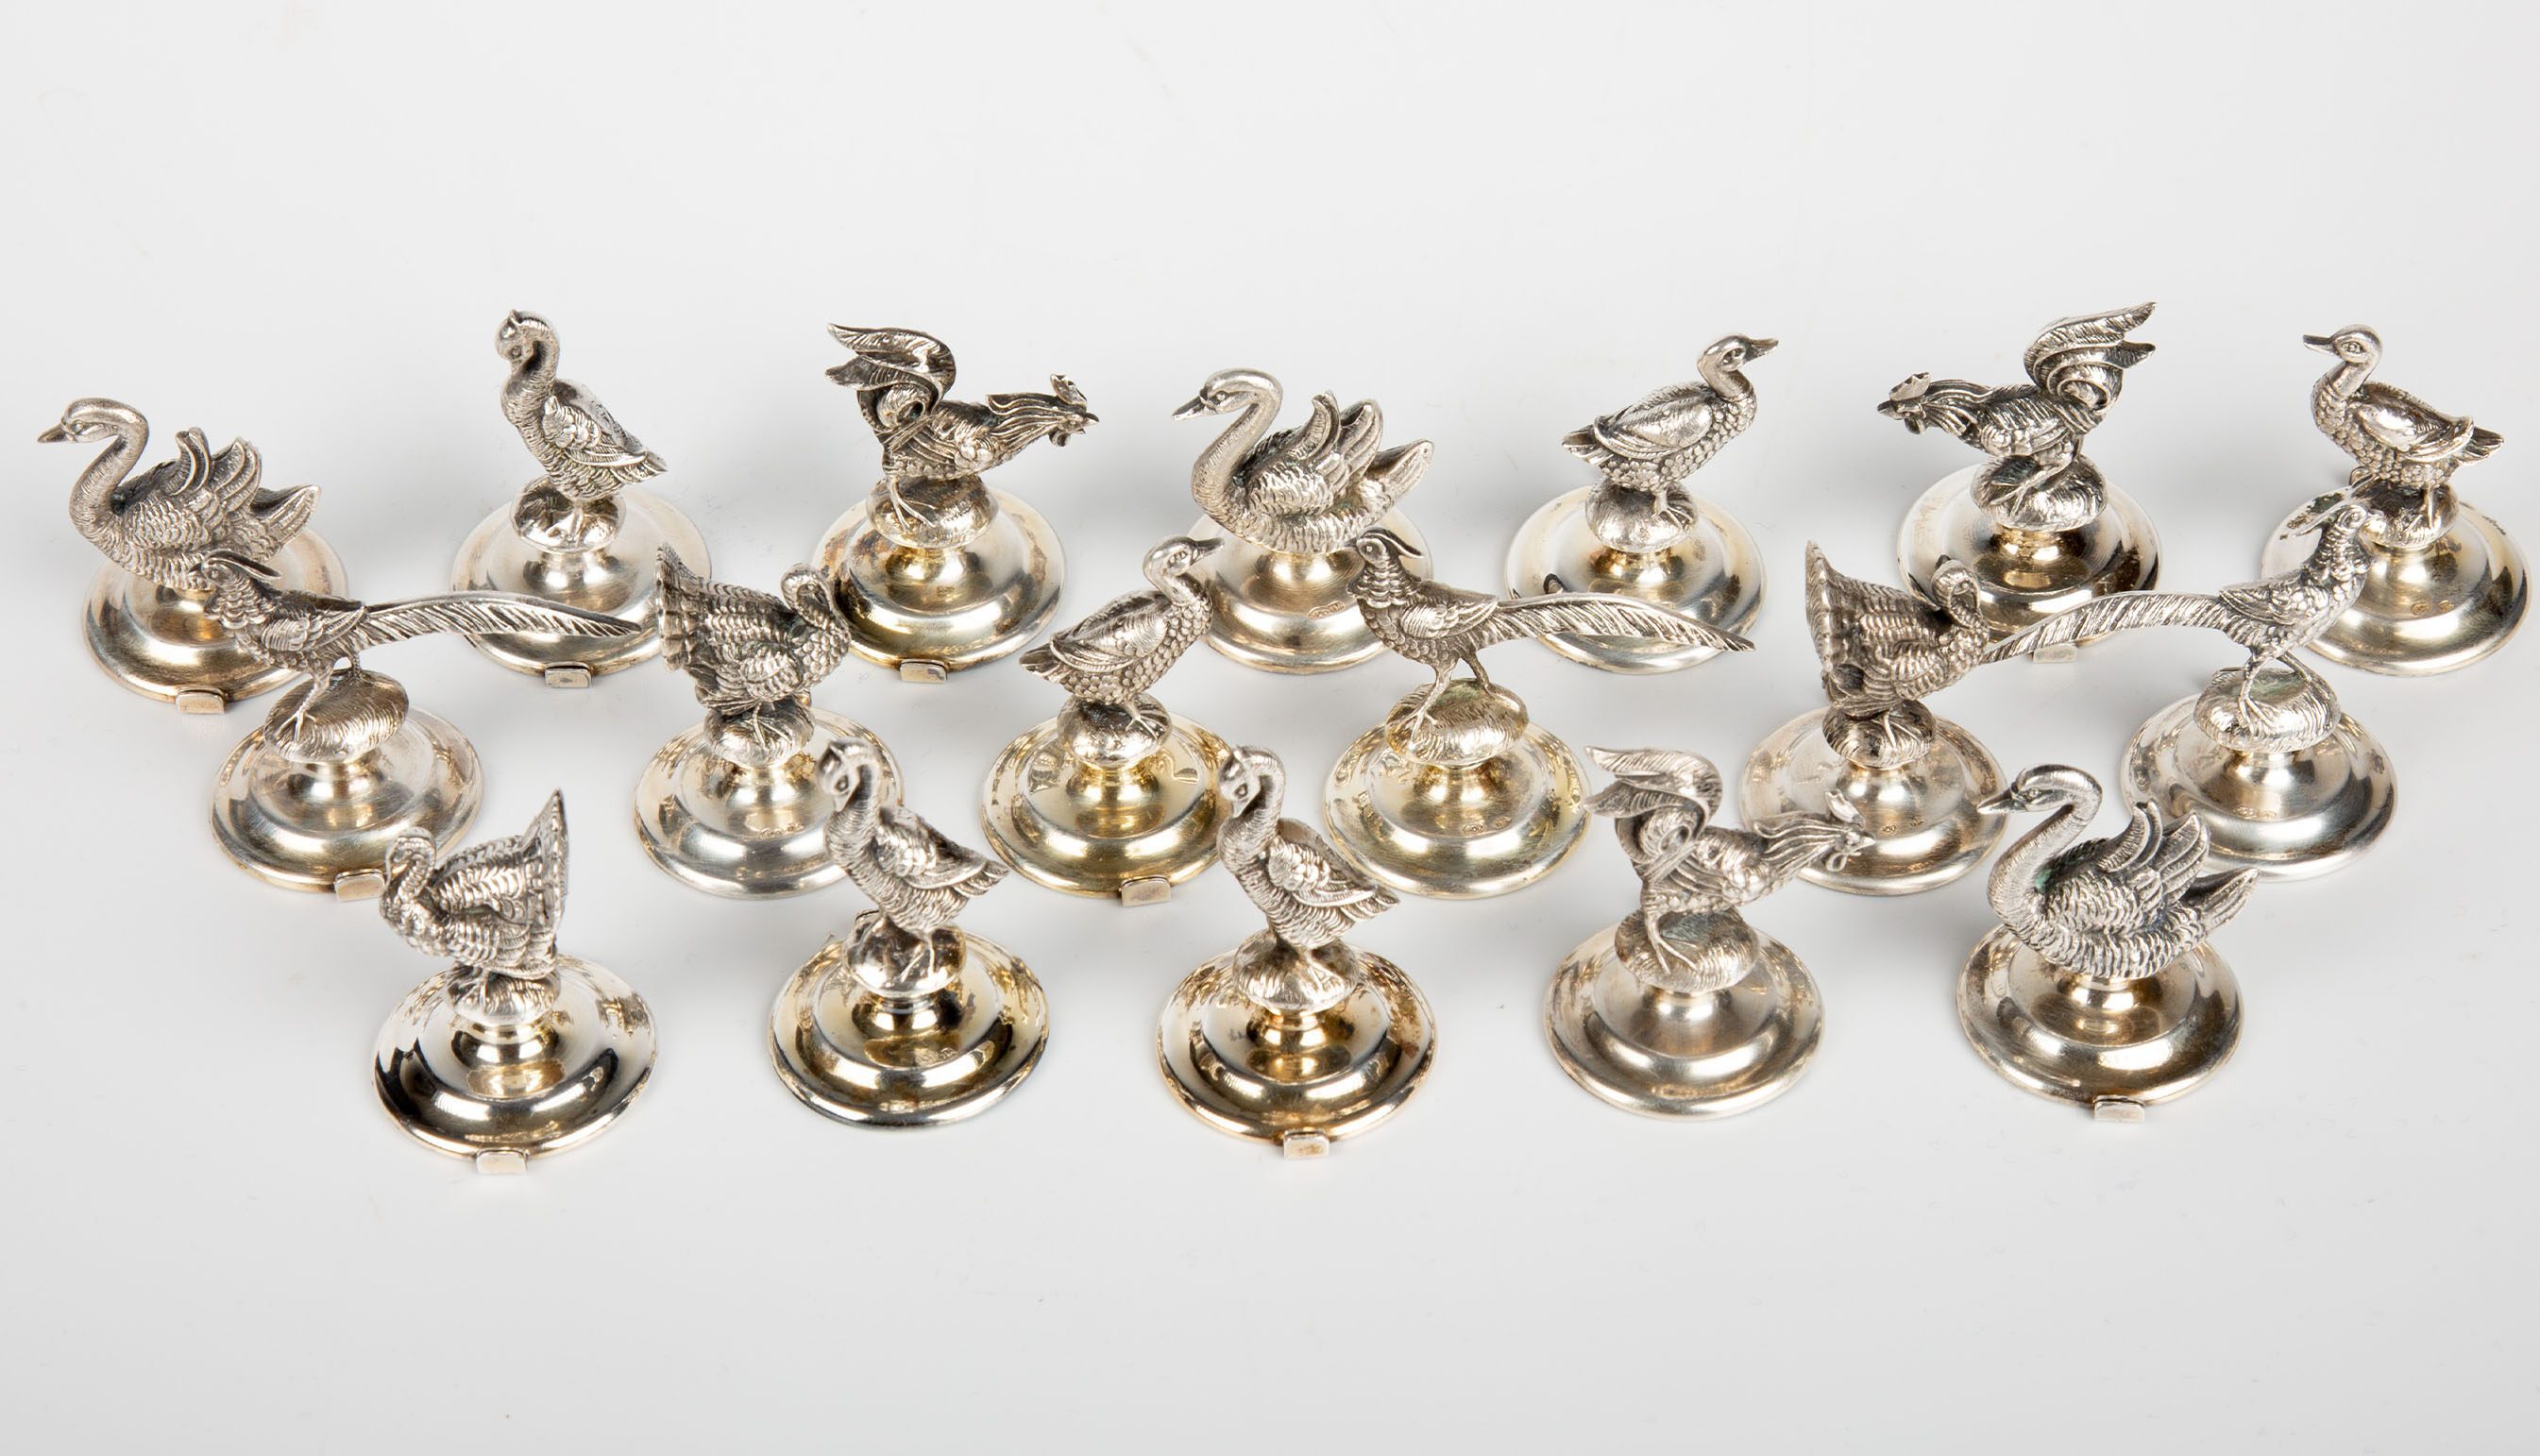 Rare Set of 18 Italian Silver Bird or Fowl Place Card Holders